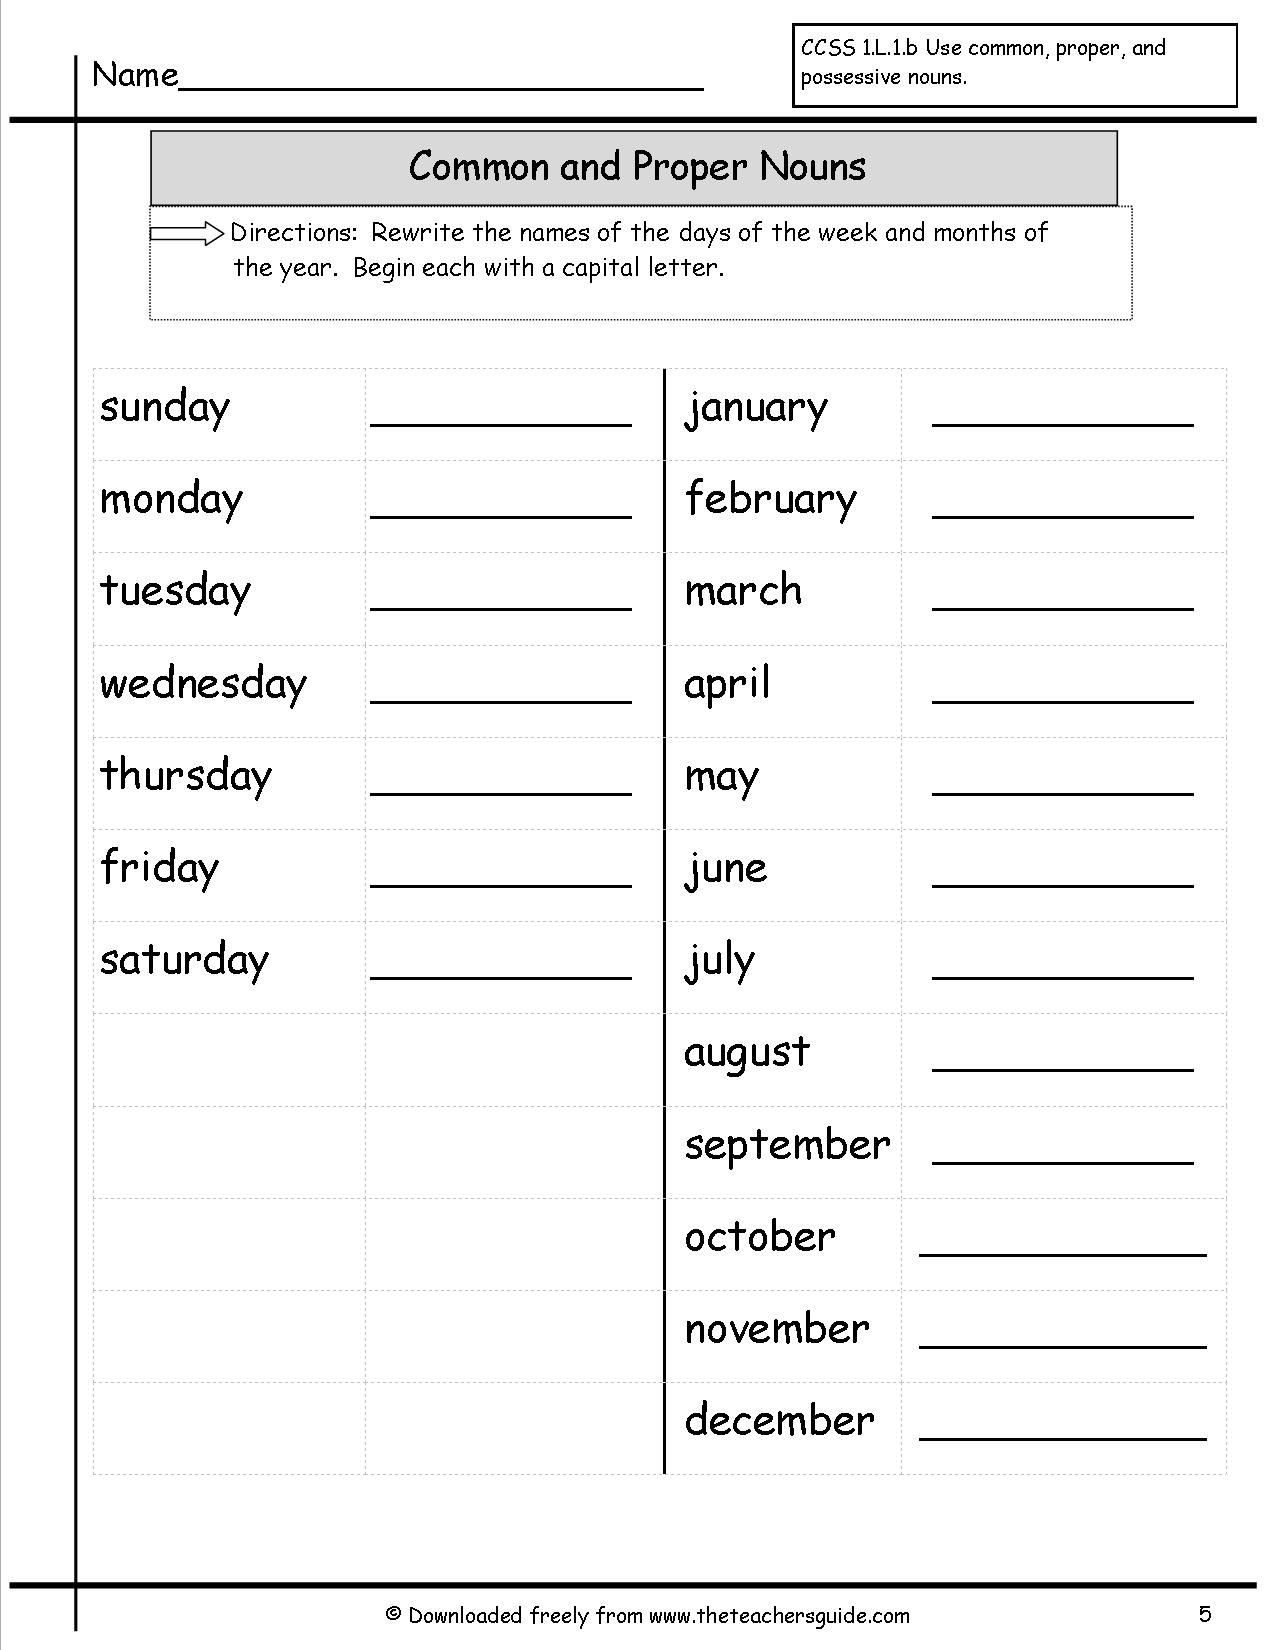 Proper Nouns Worksheet 2nd Grade Mon and Proper Nouns Worksheets From the Teacher S Guide